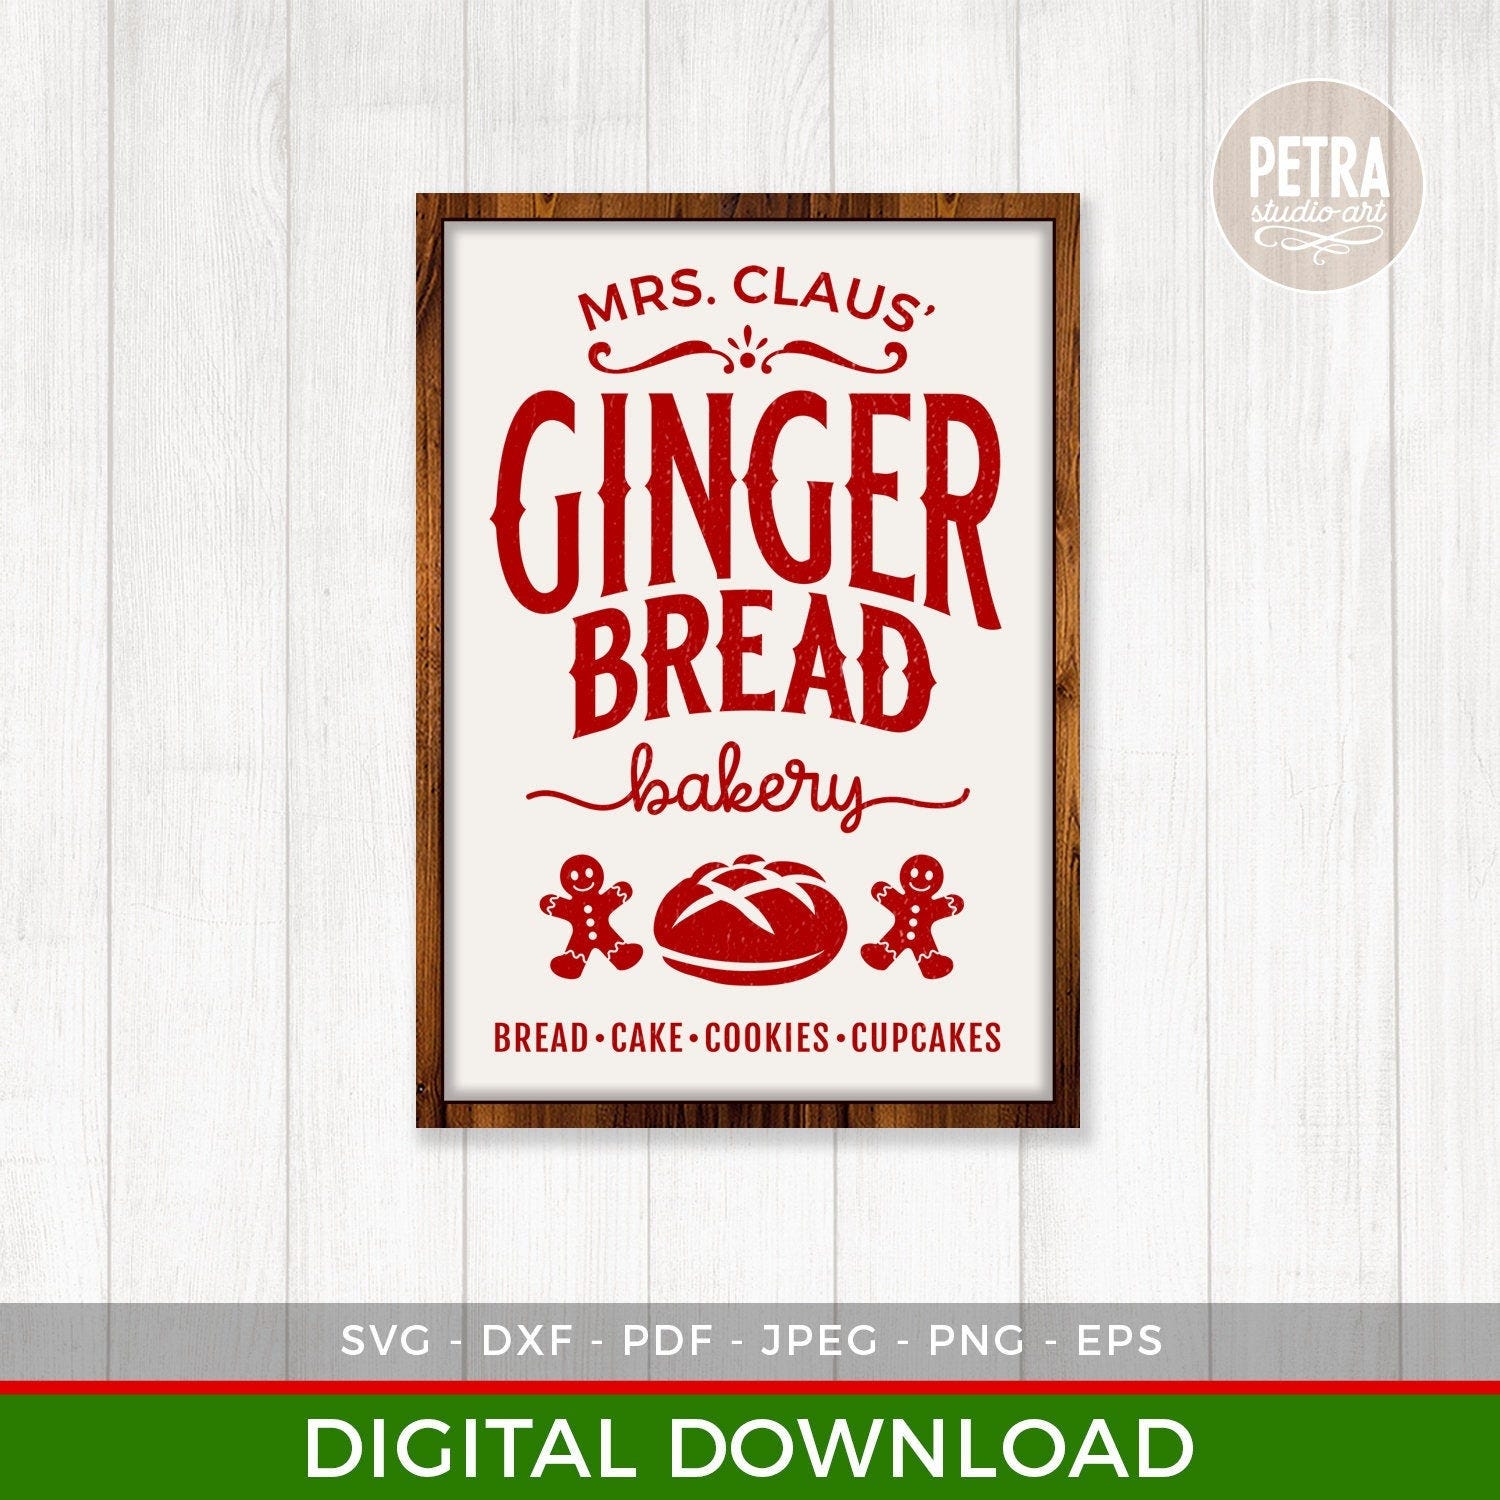 Mrs Claus Gingerbread Bakery SVG Cut File for Rustic Christmas Home Decor and Farmhouse Wall Decoration.